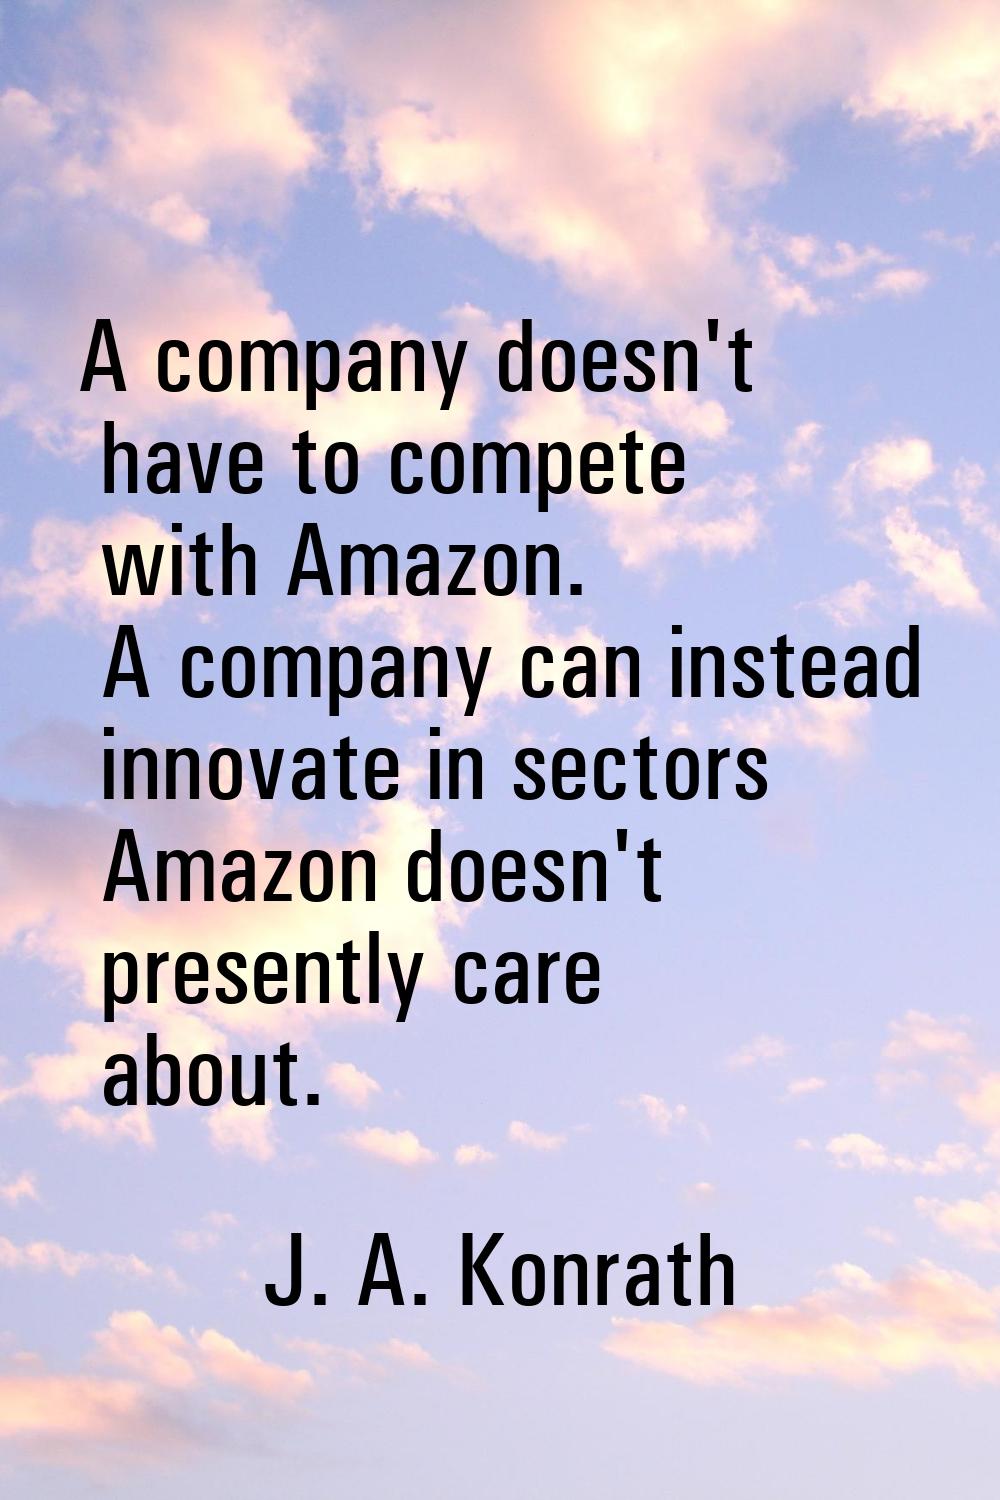 A company doesn't have to compete with Amazon. A company can instead innovate in sectors Amazon doe